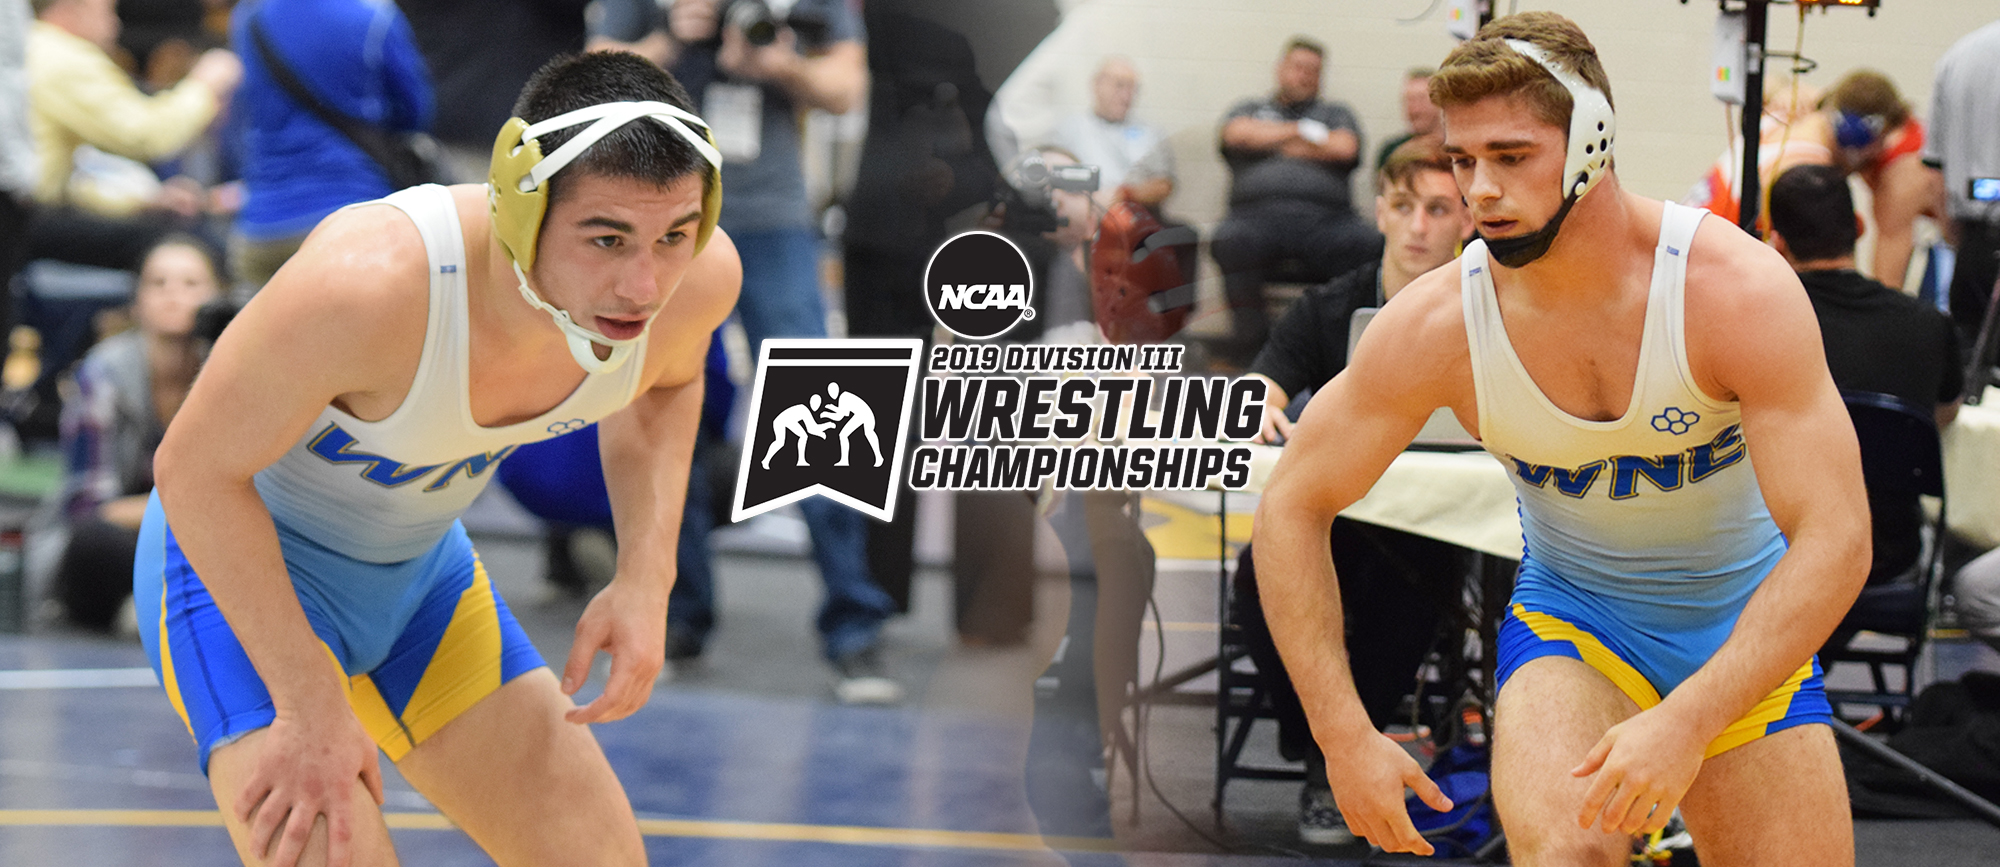 Ryan Monteiro & John Boyle will represent the Golden Bears at the NCAA DIII Championships in two weeks following their second place finishes at the NCAA Northeast Regional.